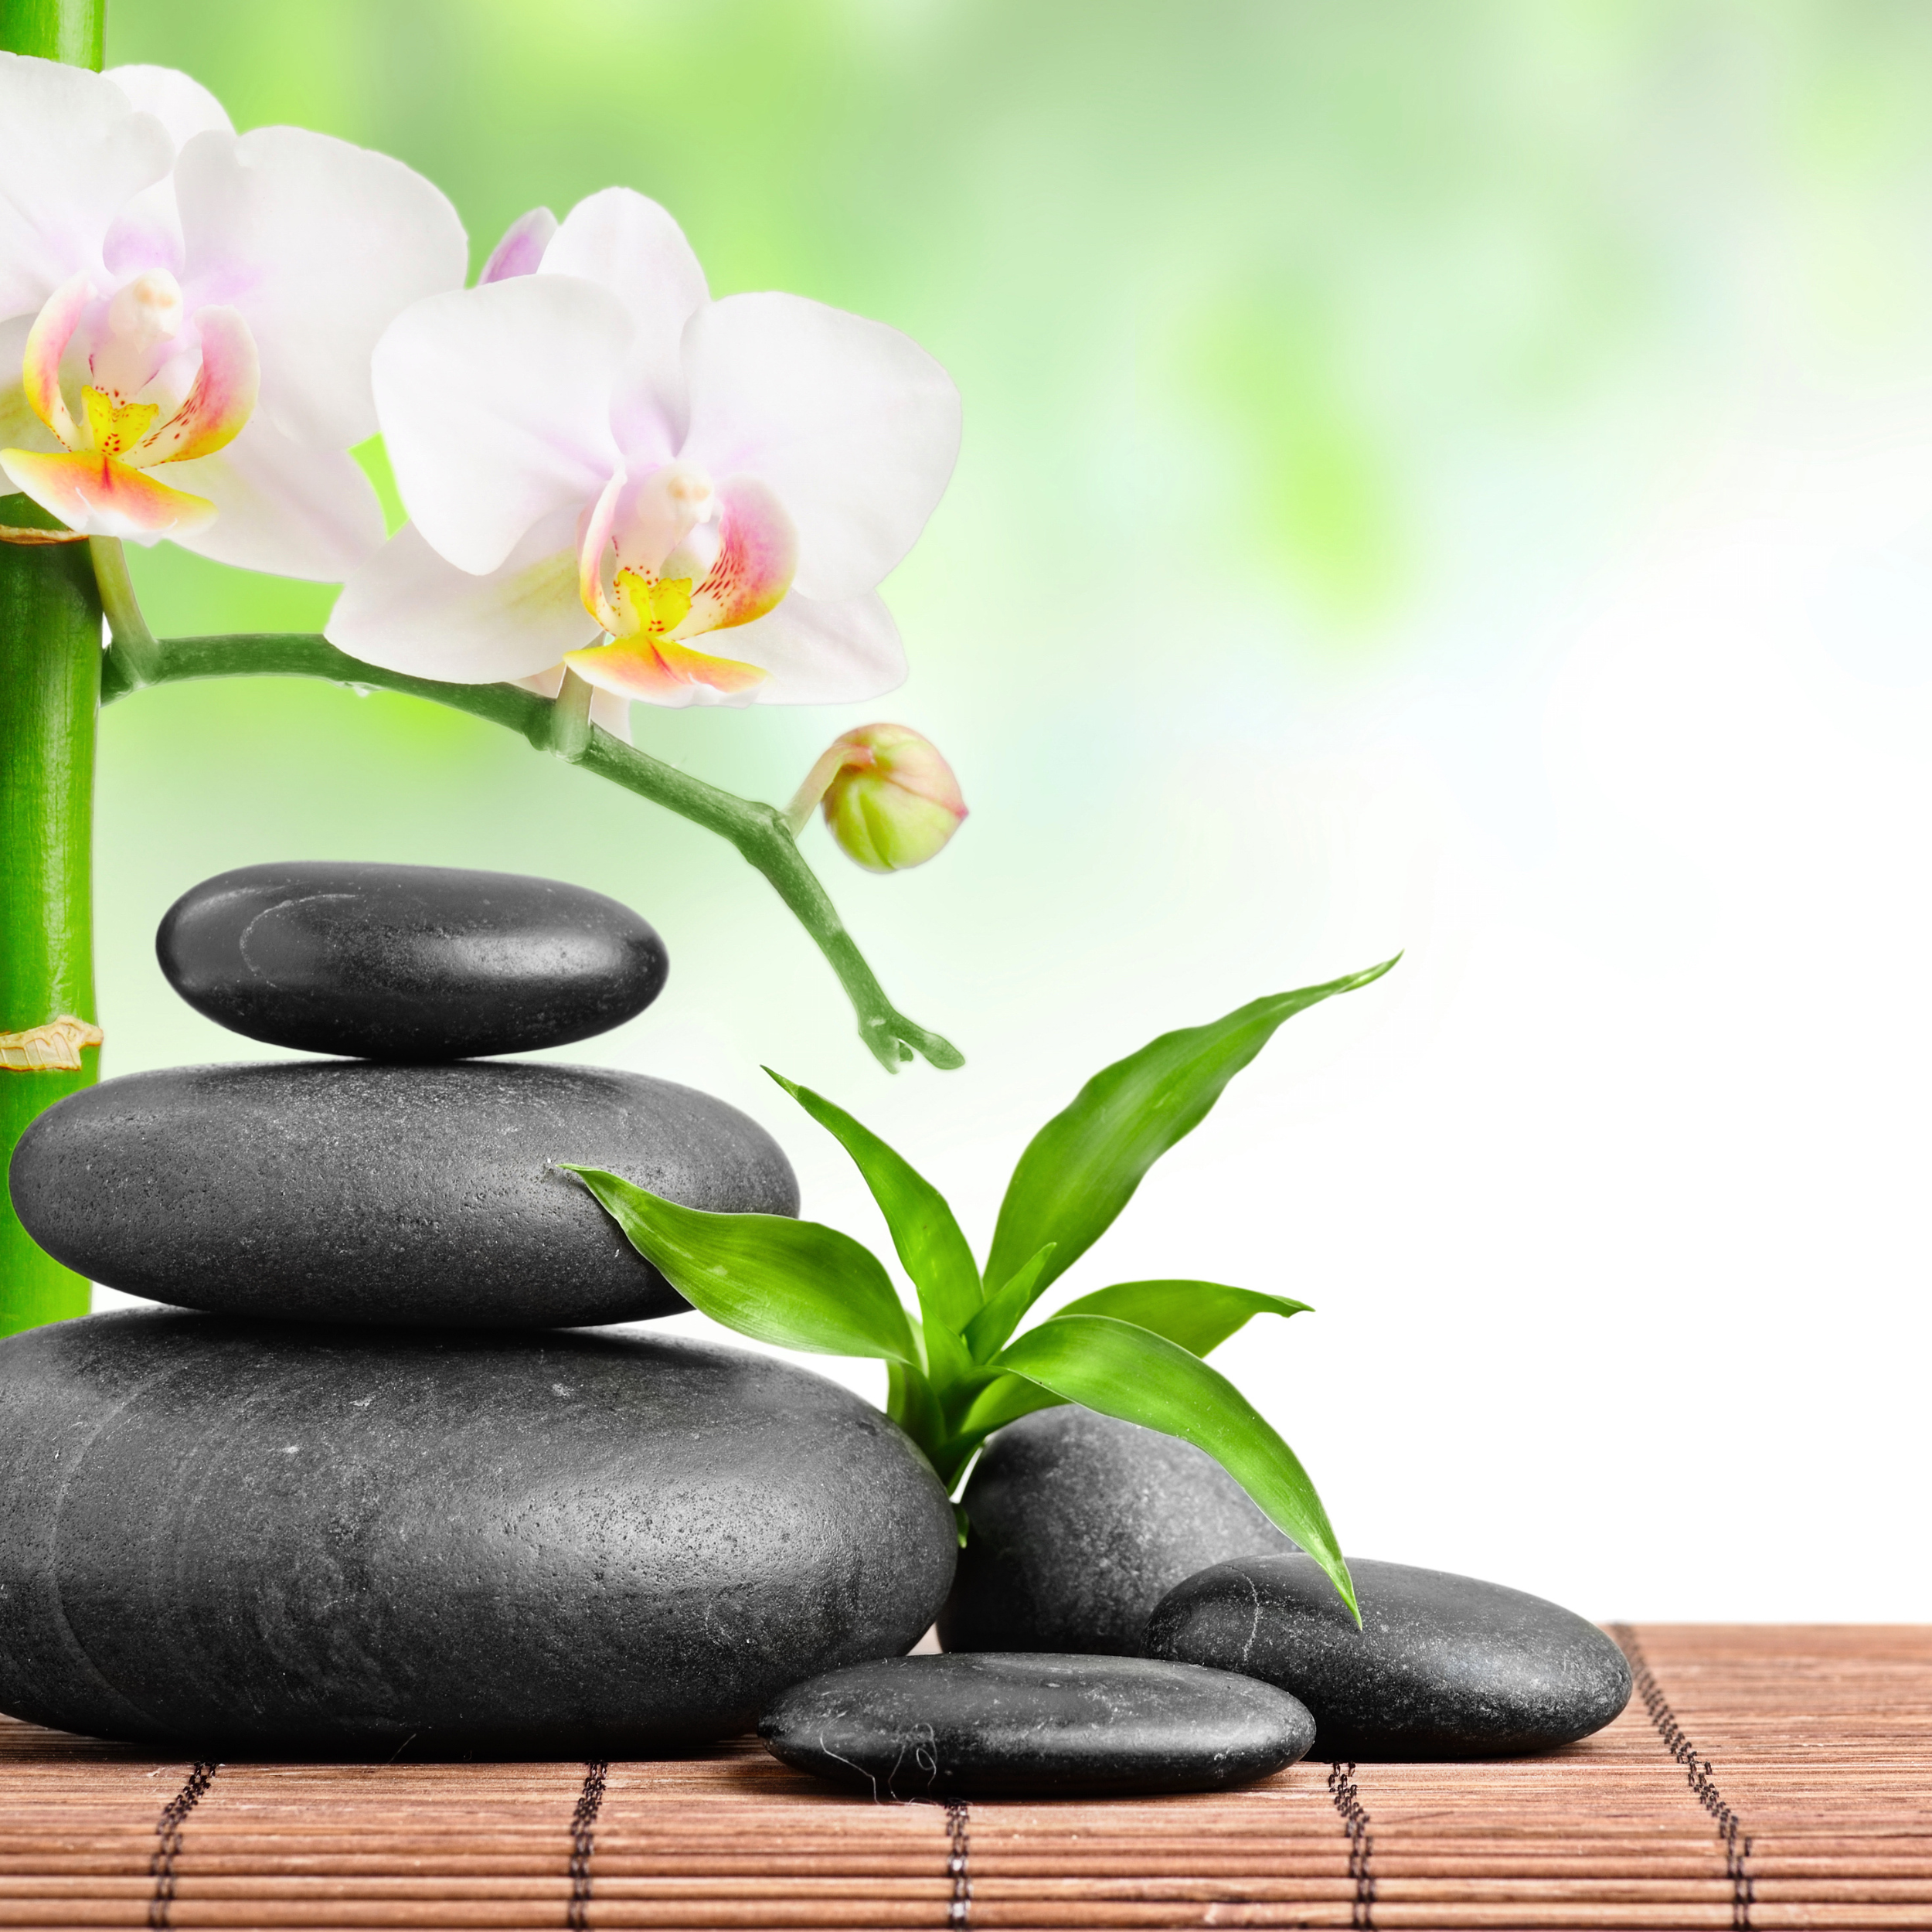 Health & Wellness Default Image: three stones balanced on one another with orchids and bamboo with a serene green background